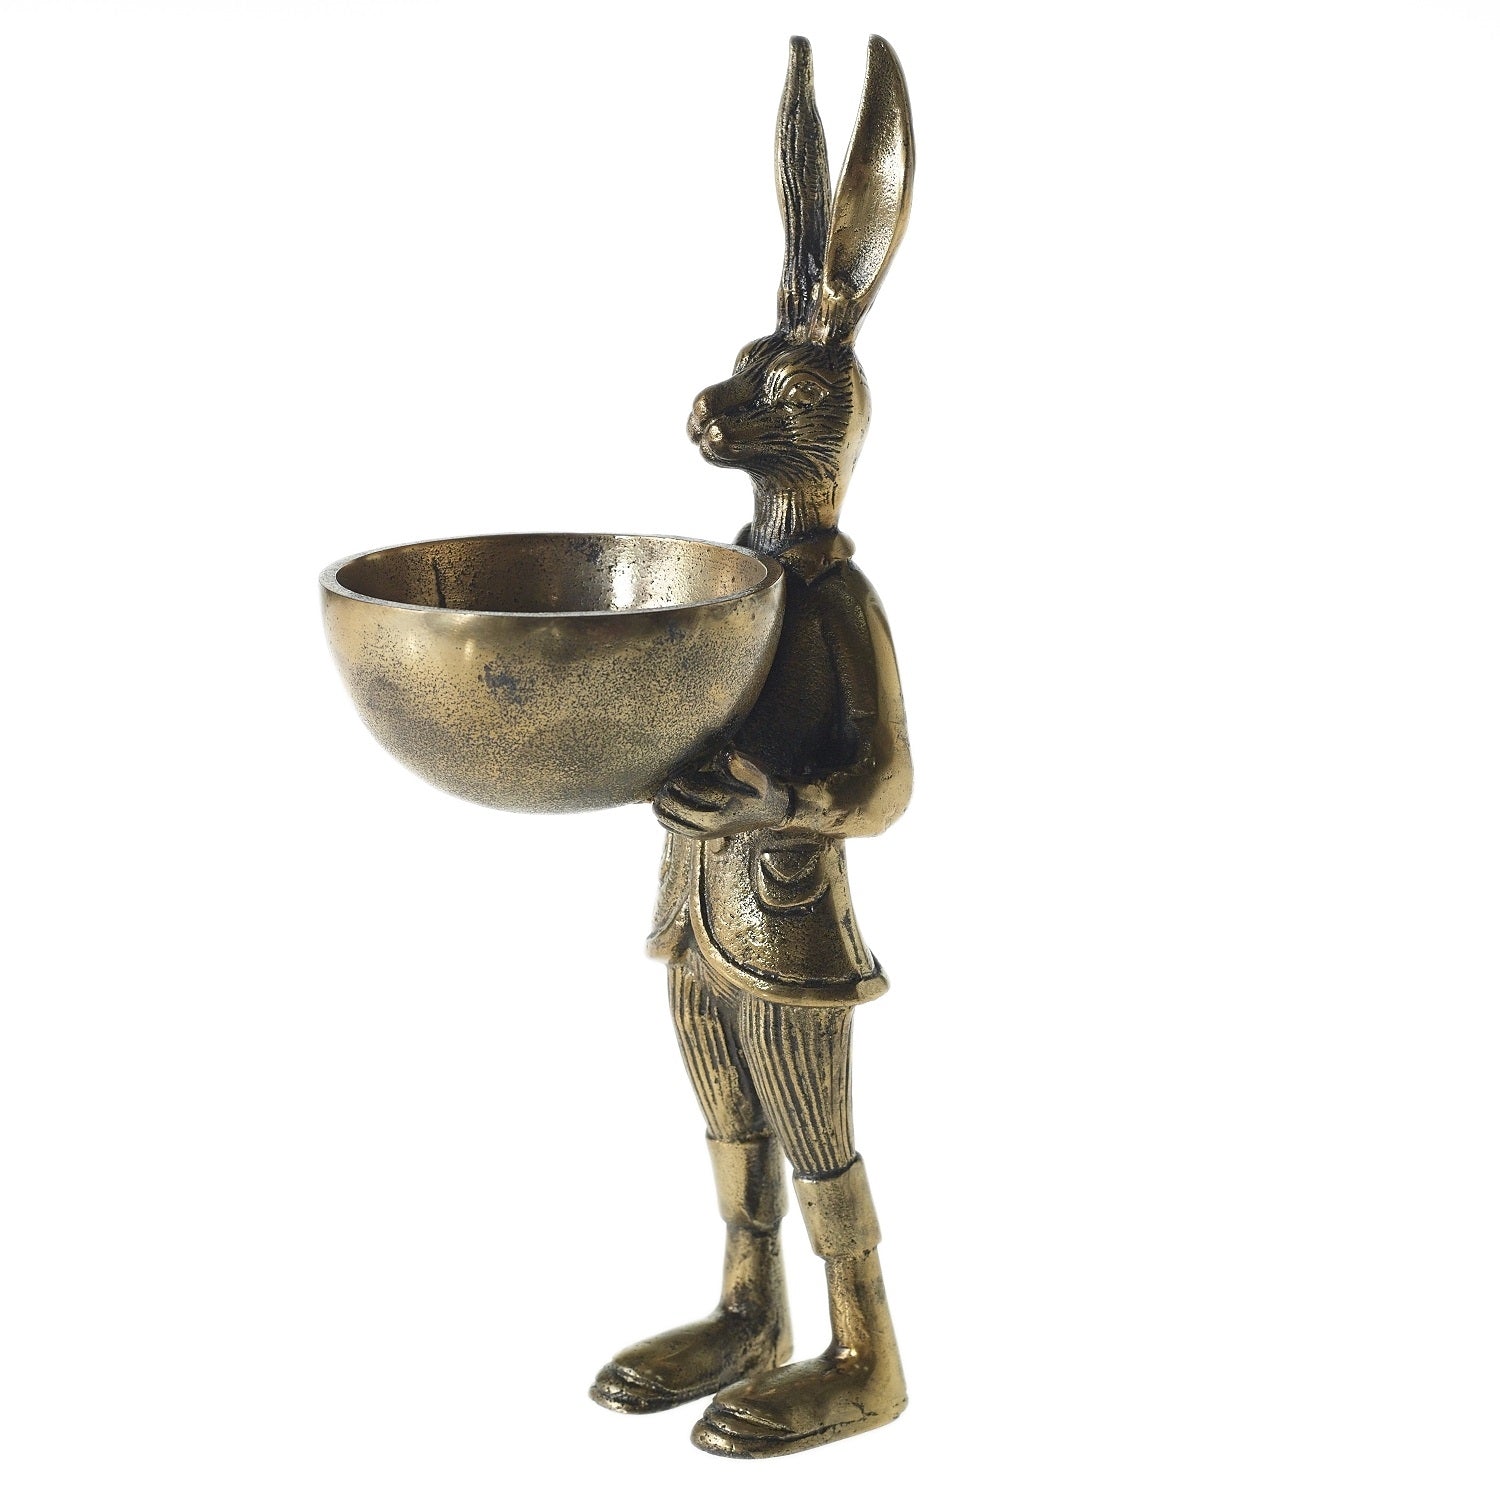 A well-dressed Accent Decor standing Hare Dishstand holding a round dish.